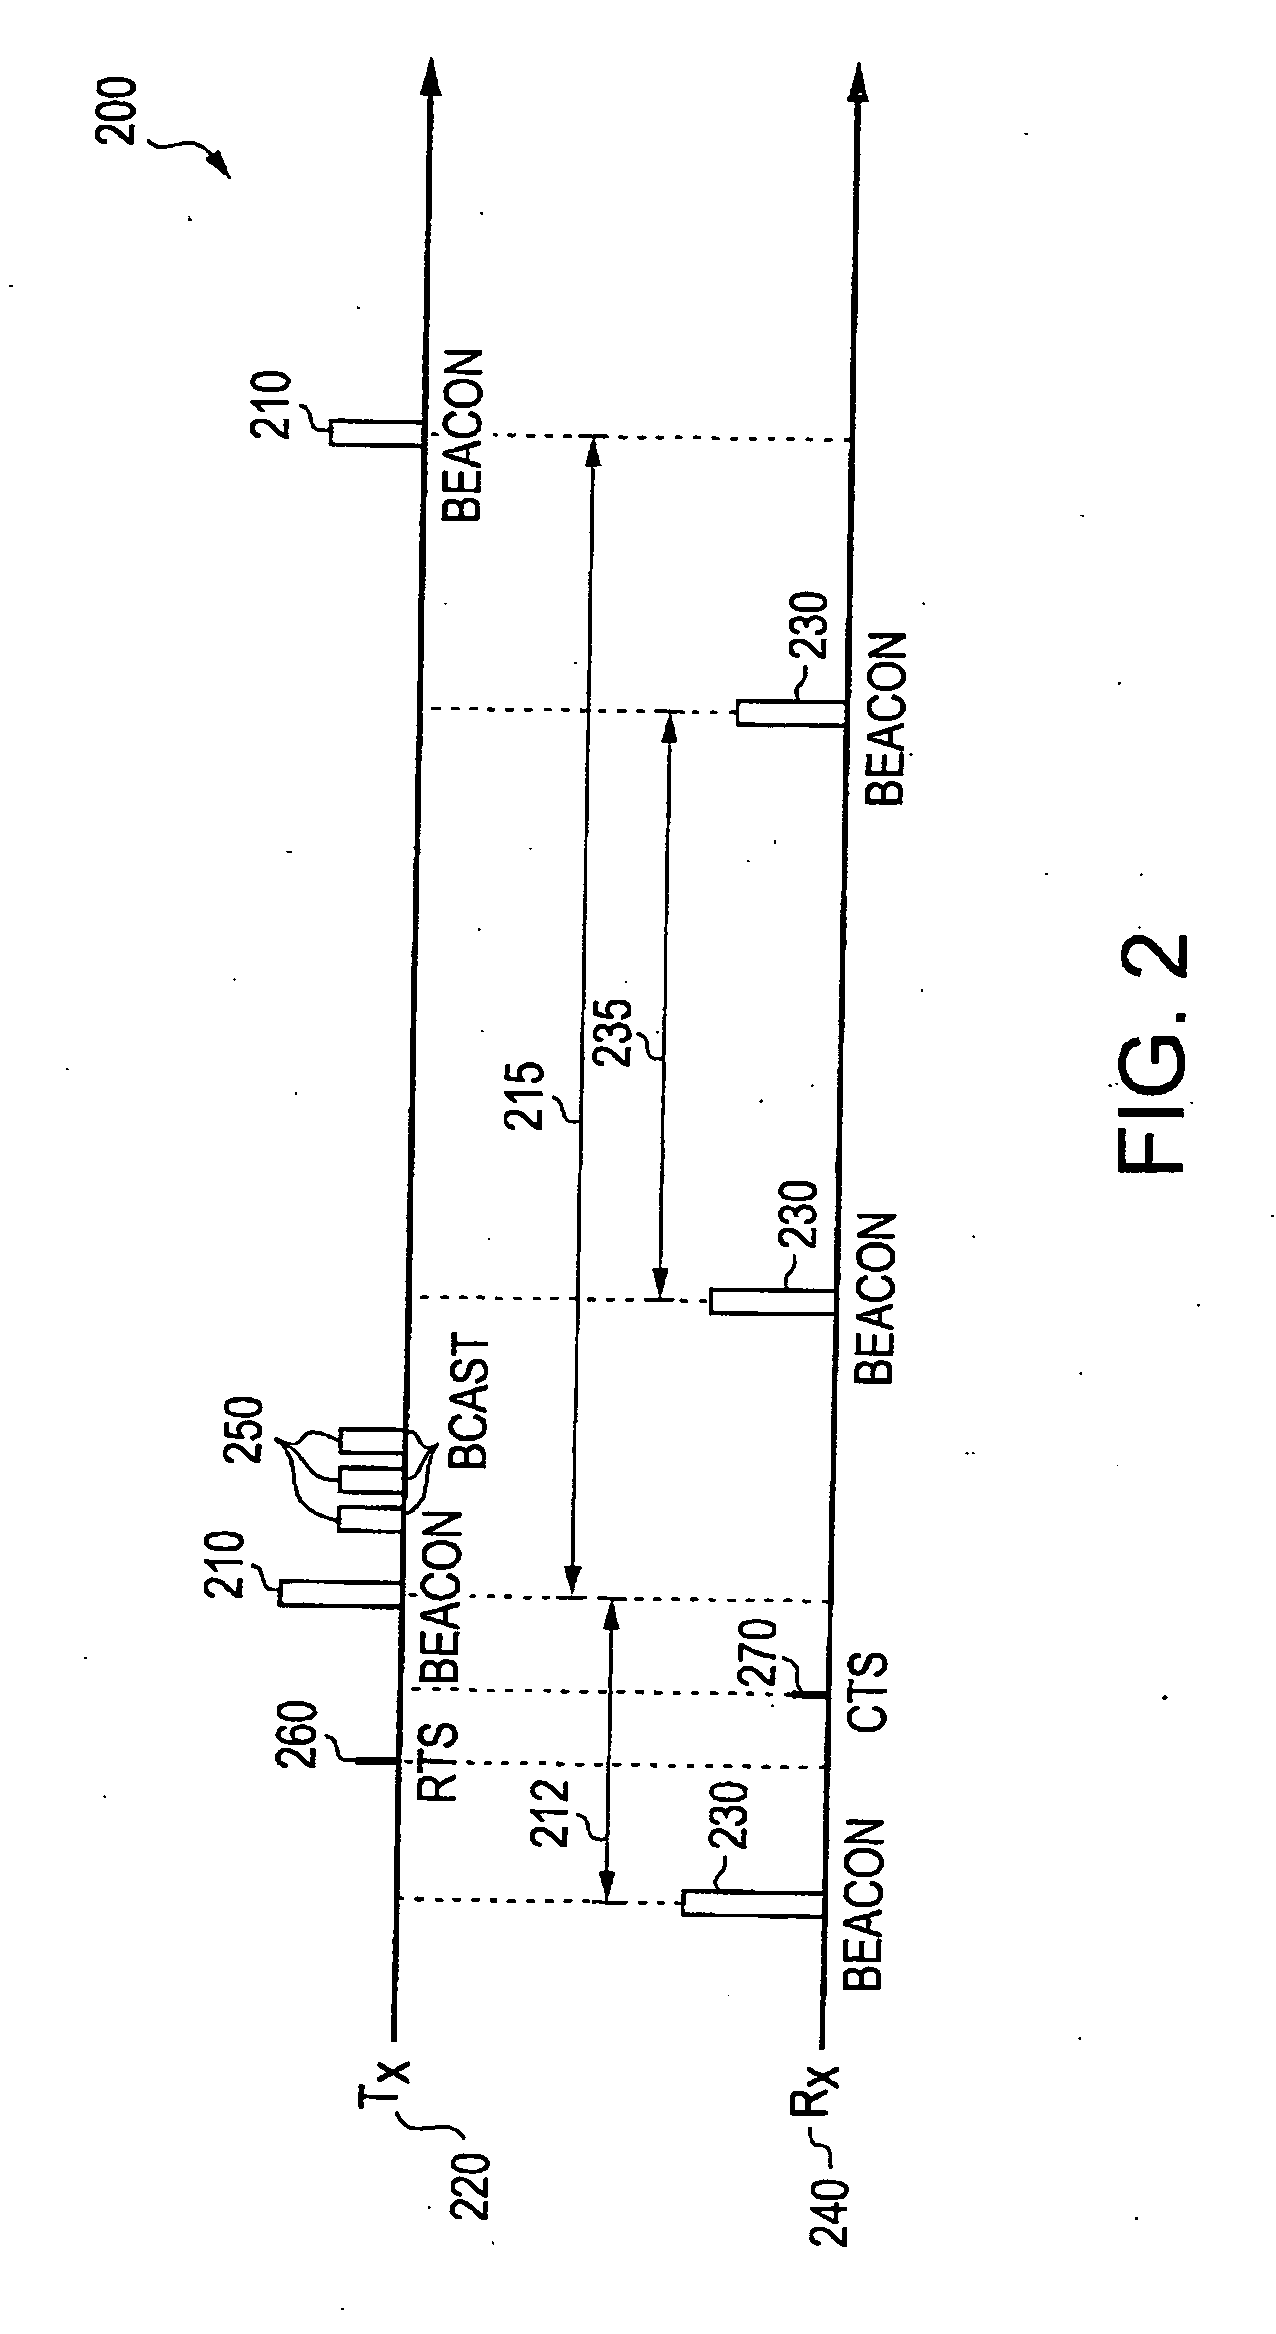 Method and apparatus of multiple entity wireless communication adapter